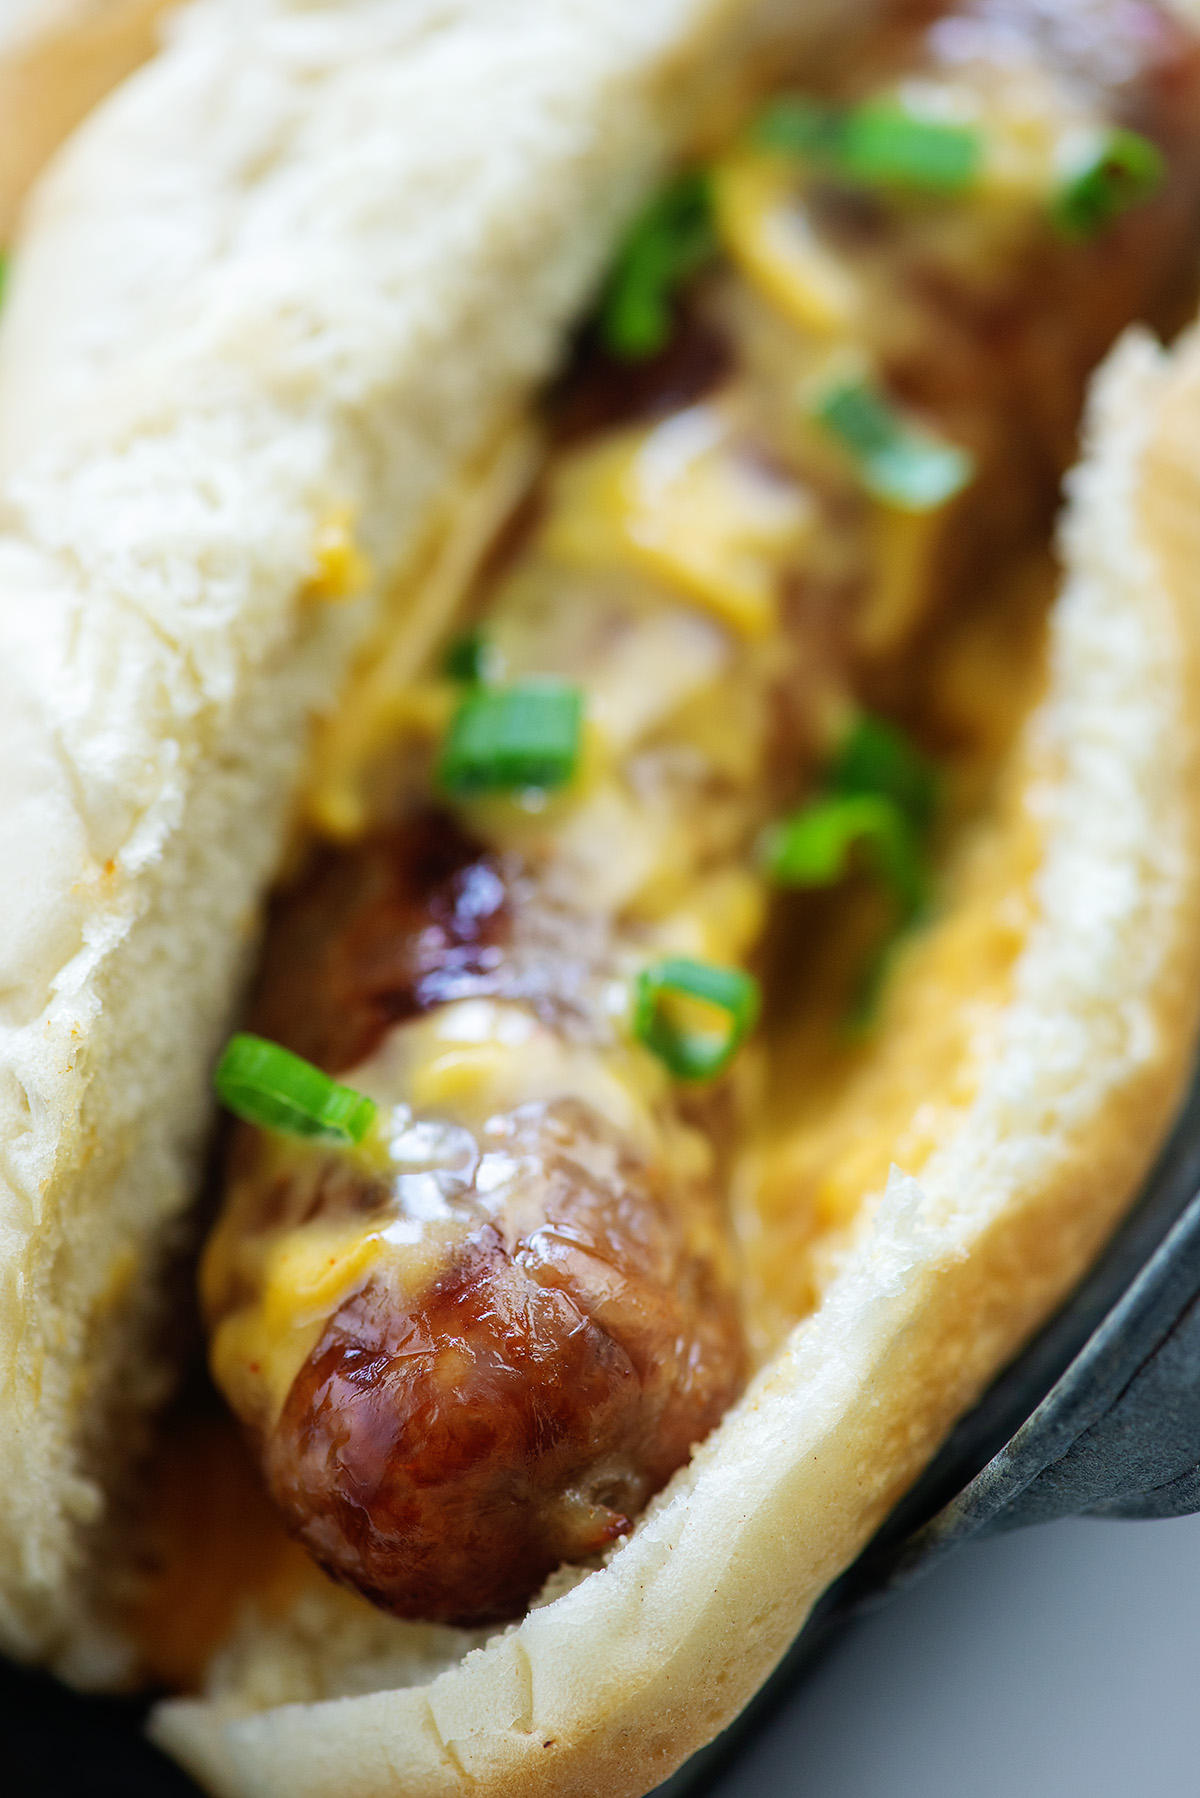 A close up of a bratwurst on a bun topped with beer cheese sauce and diced green onions.